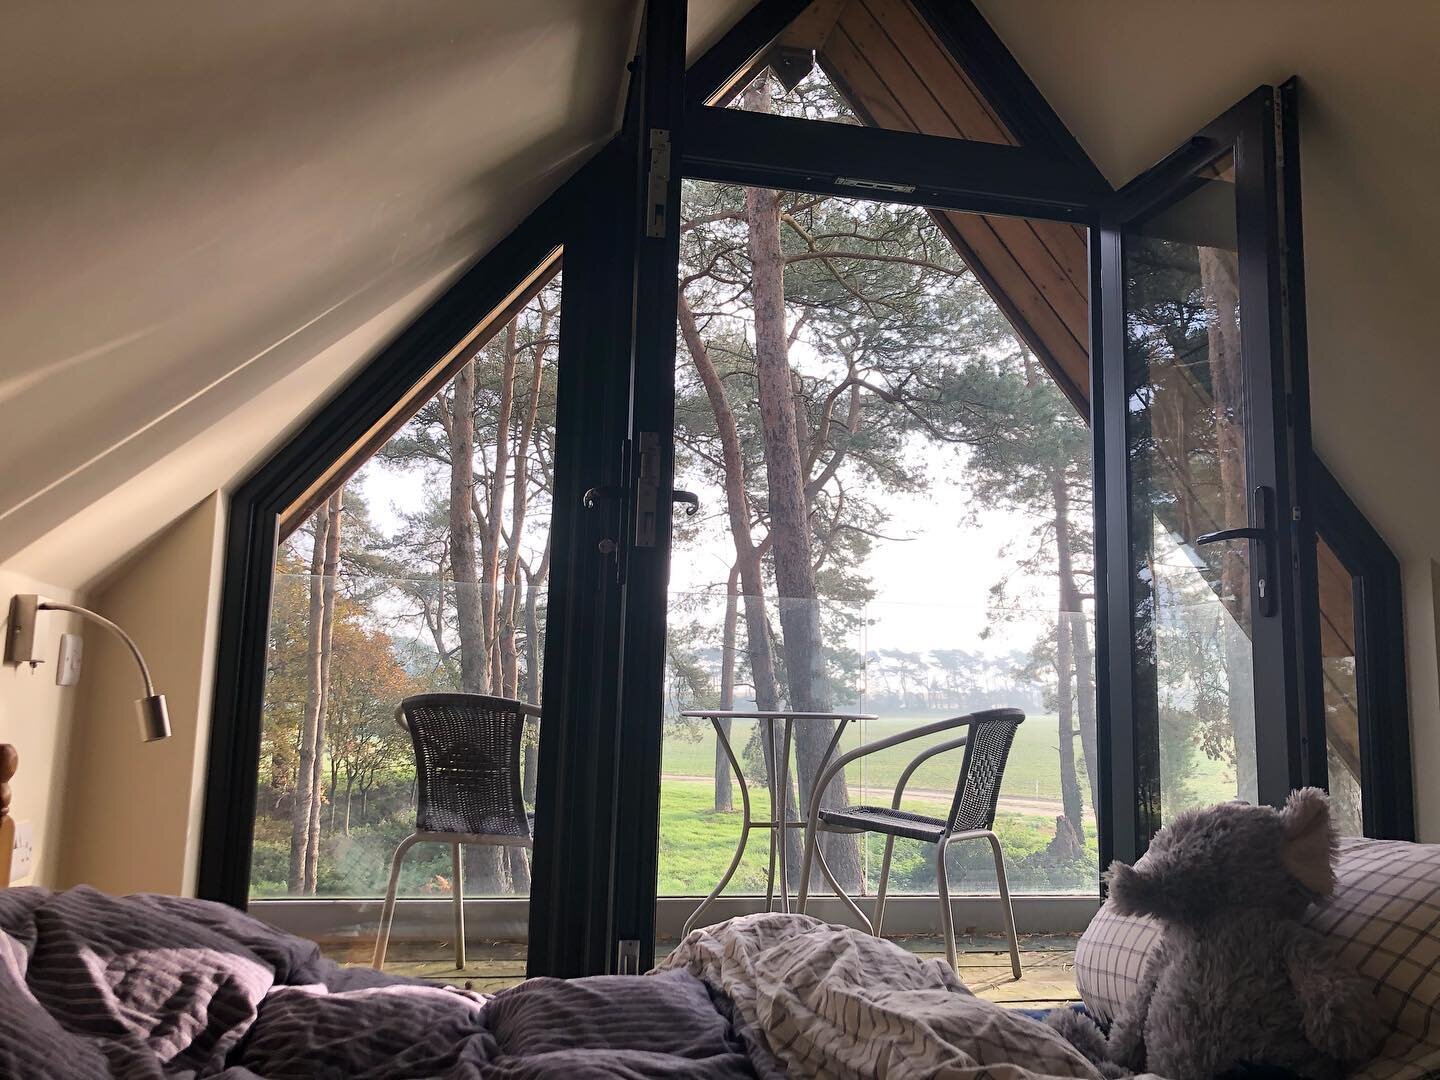 Waking up in the tree tops at Toad Hall
*
*
*
*
#treehouselife #treehousestaysuk #treetopviews #luxuryglamping #winterstaycation #escapetheeverydayathome #norfolkglamping #nevertooold #silversurfer #innerchildtherapy #findyourfun